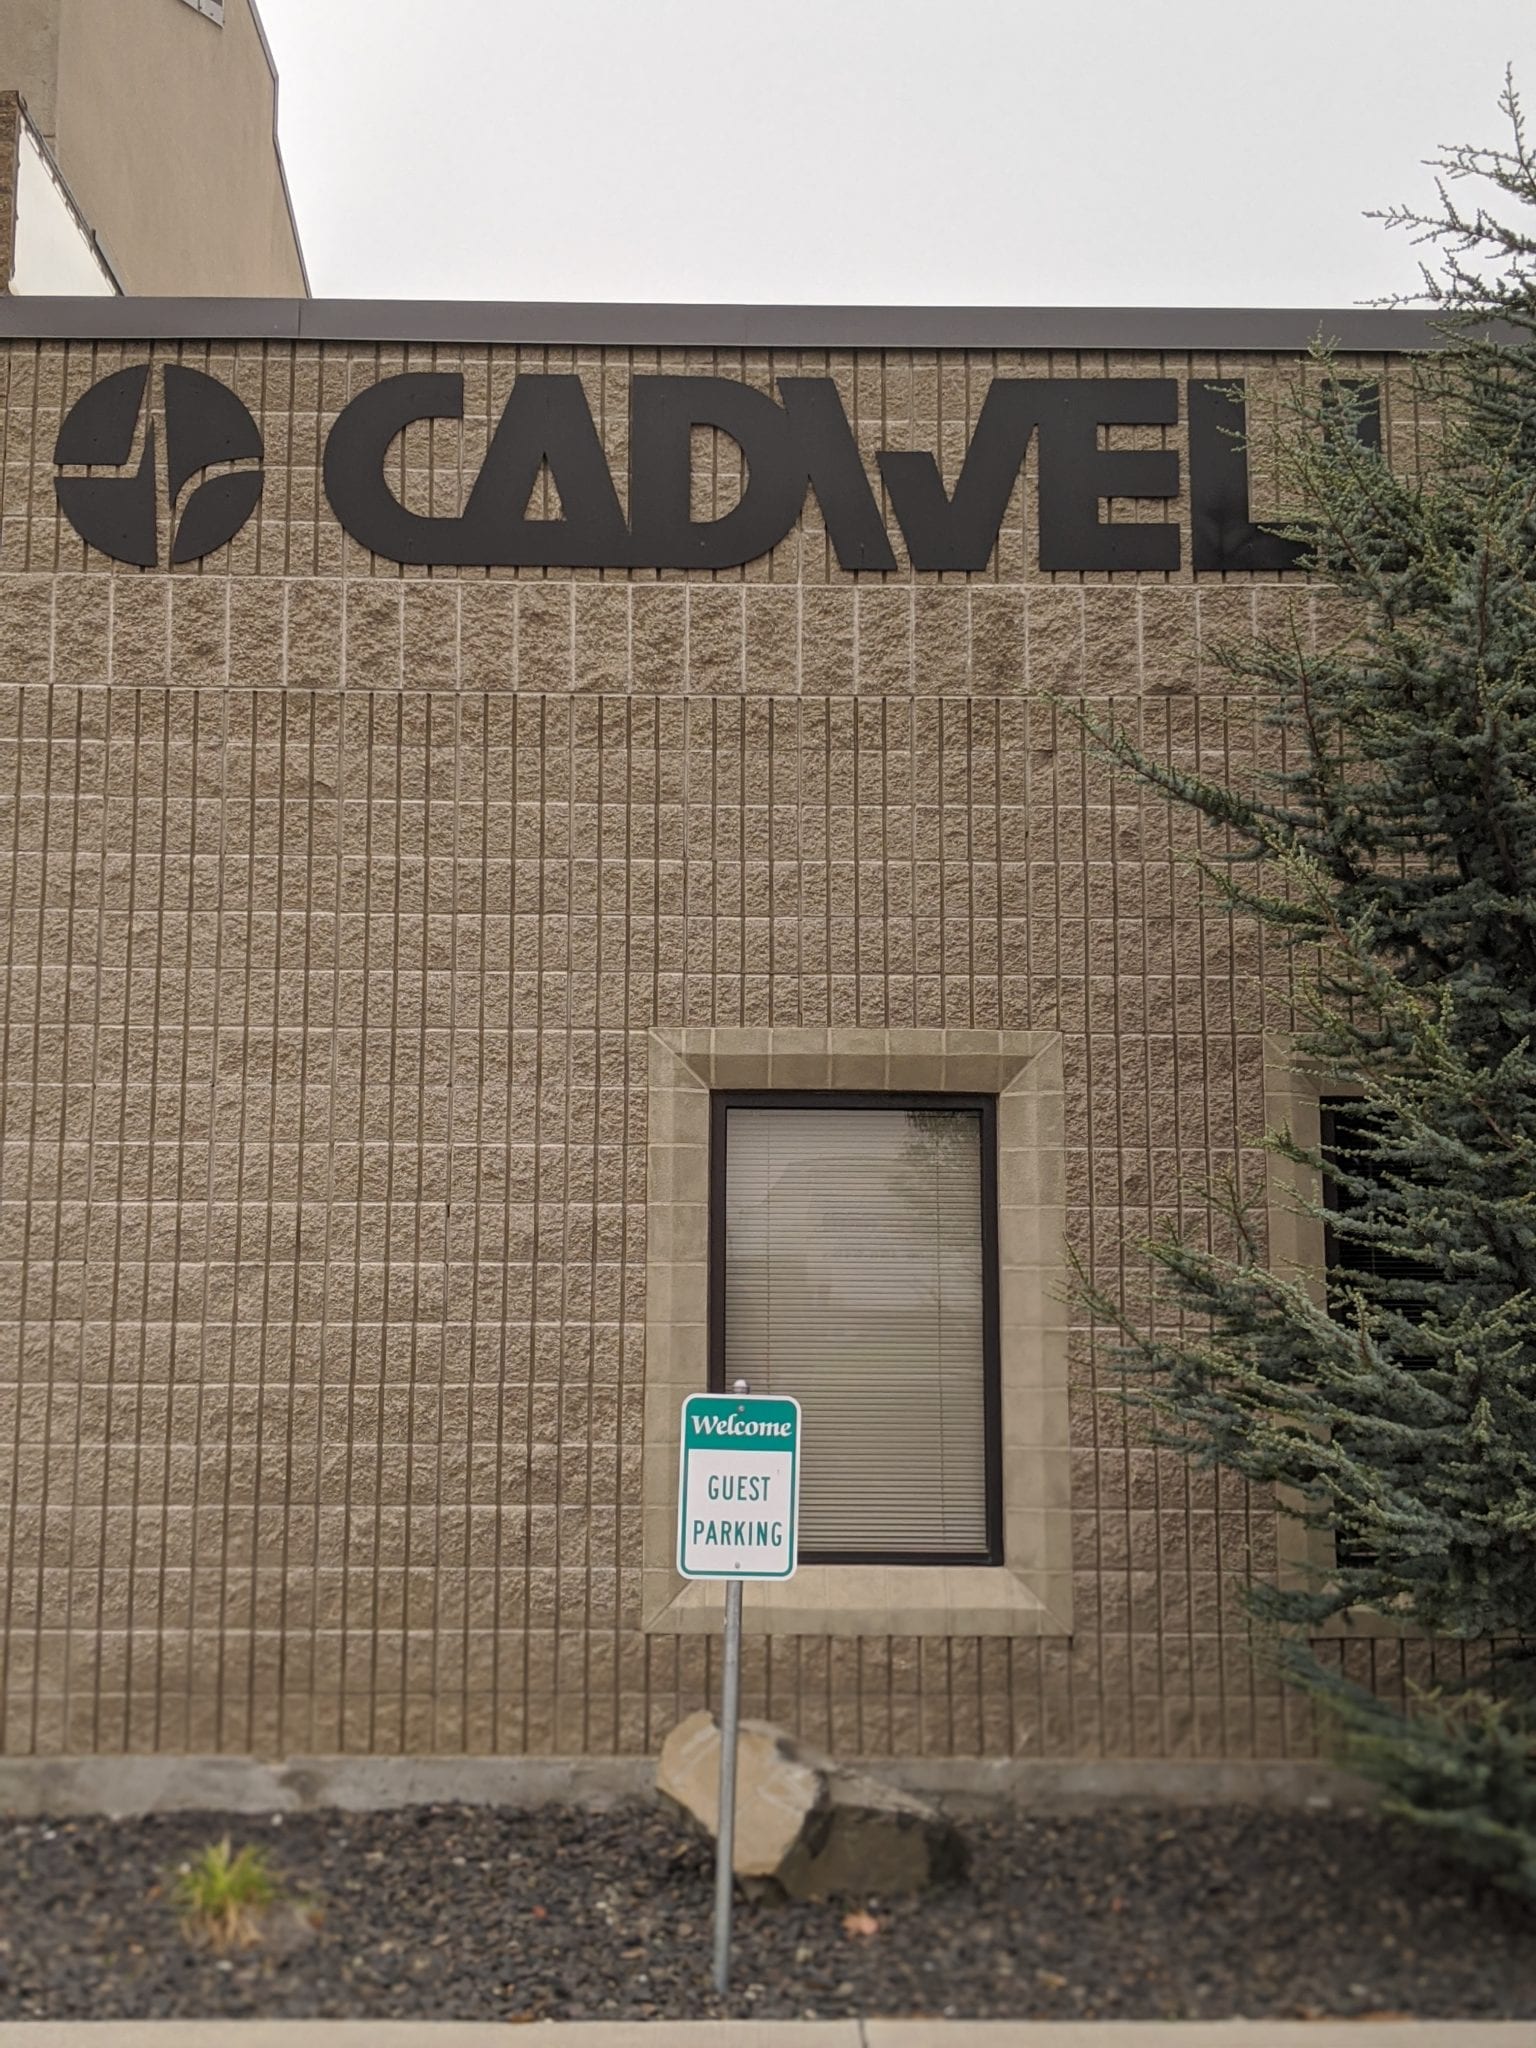 Cadwell donates 90 laptops to local schools